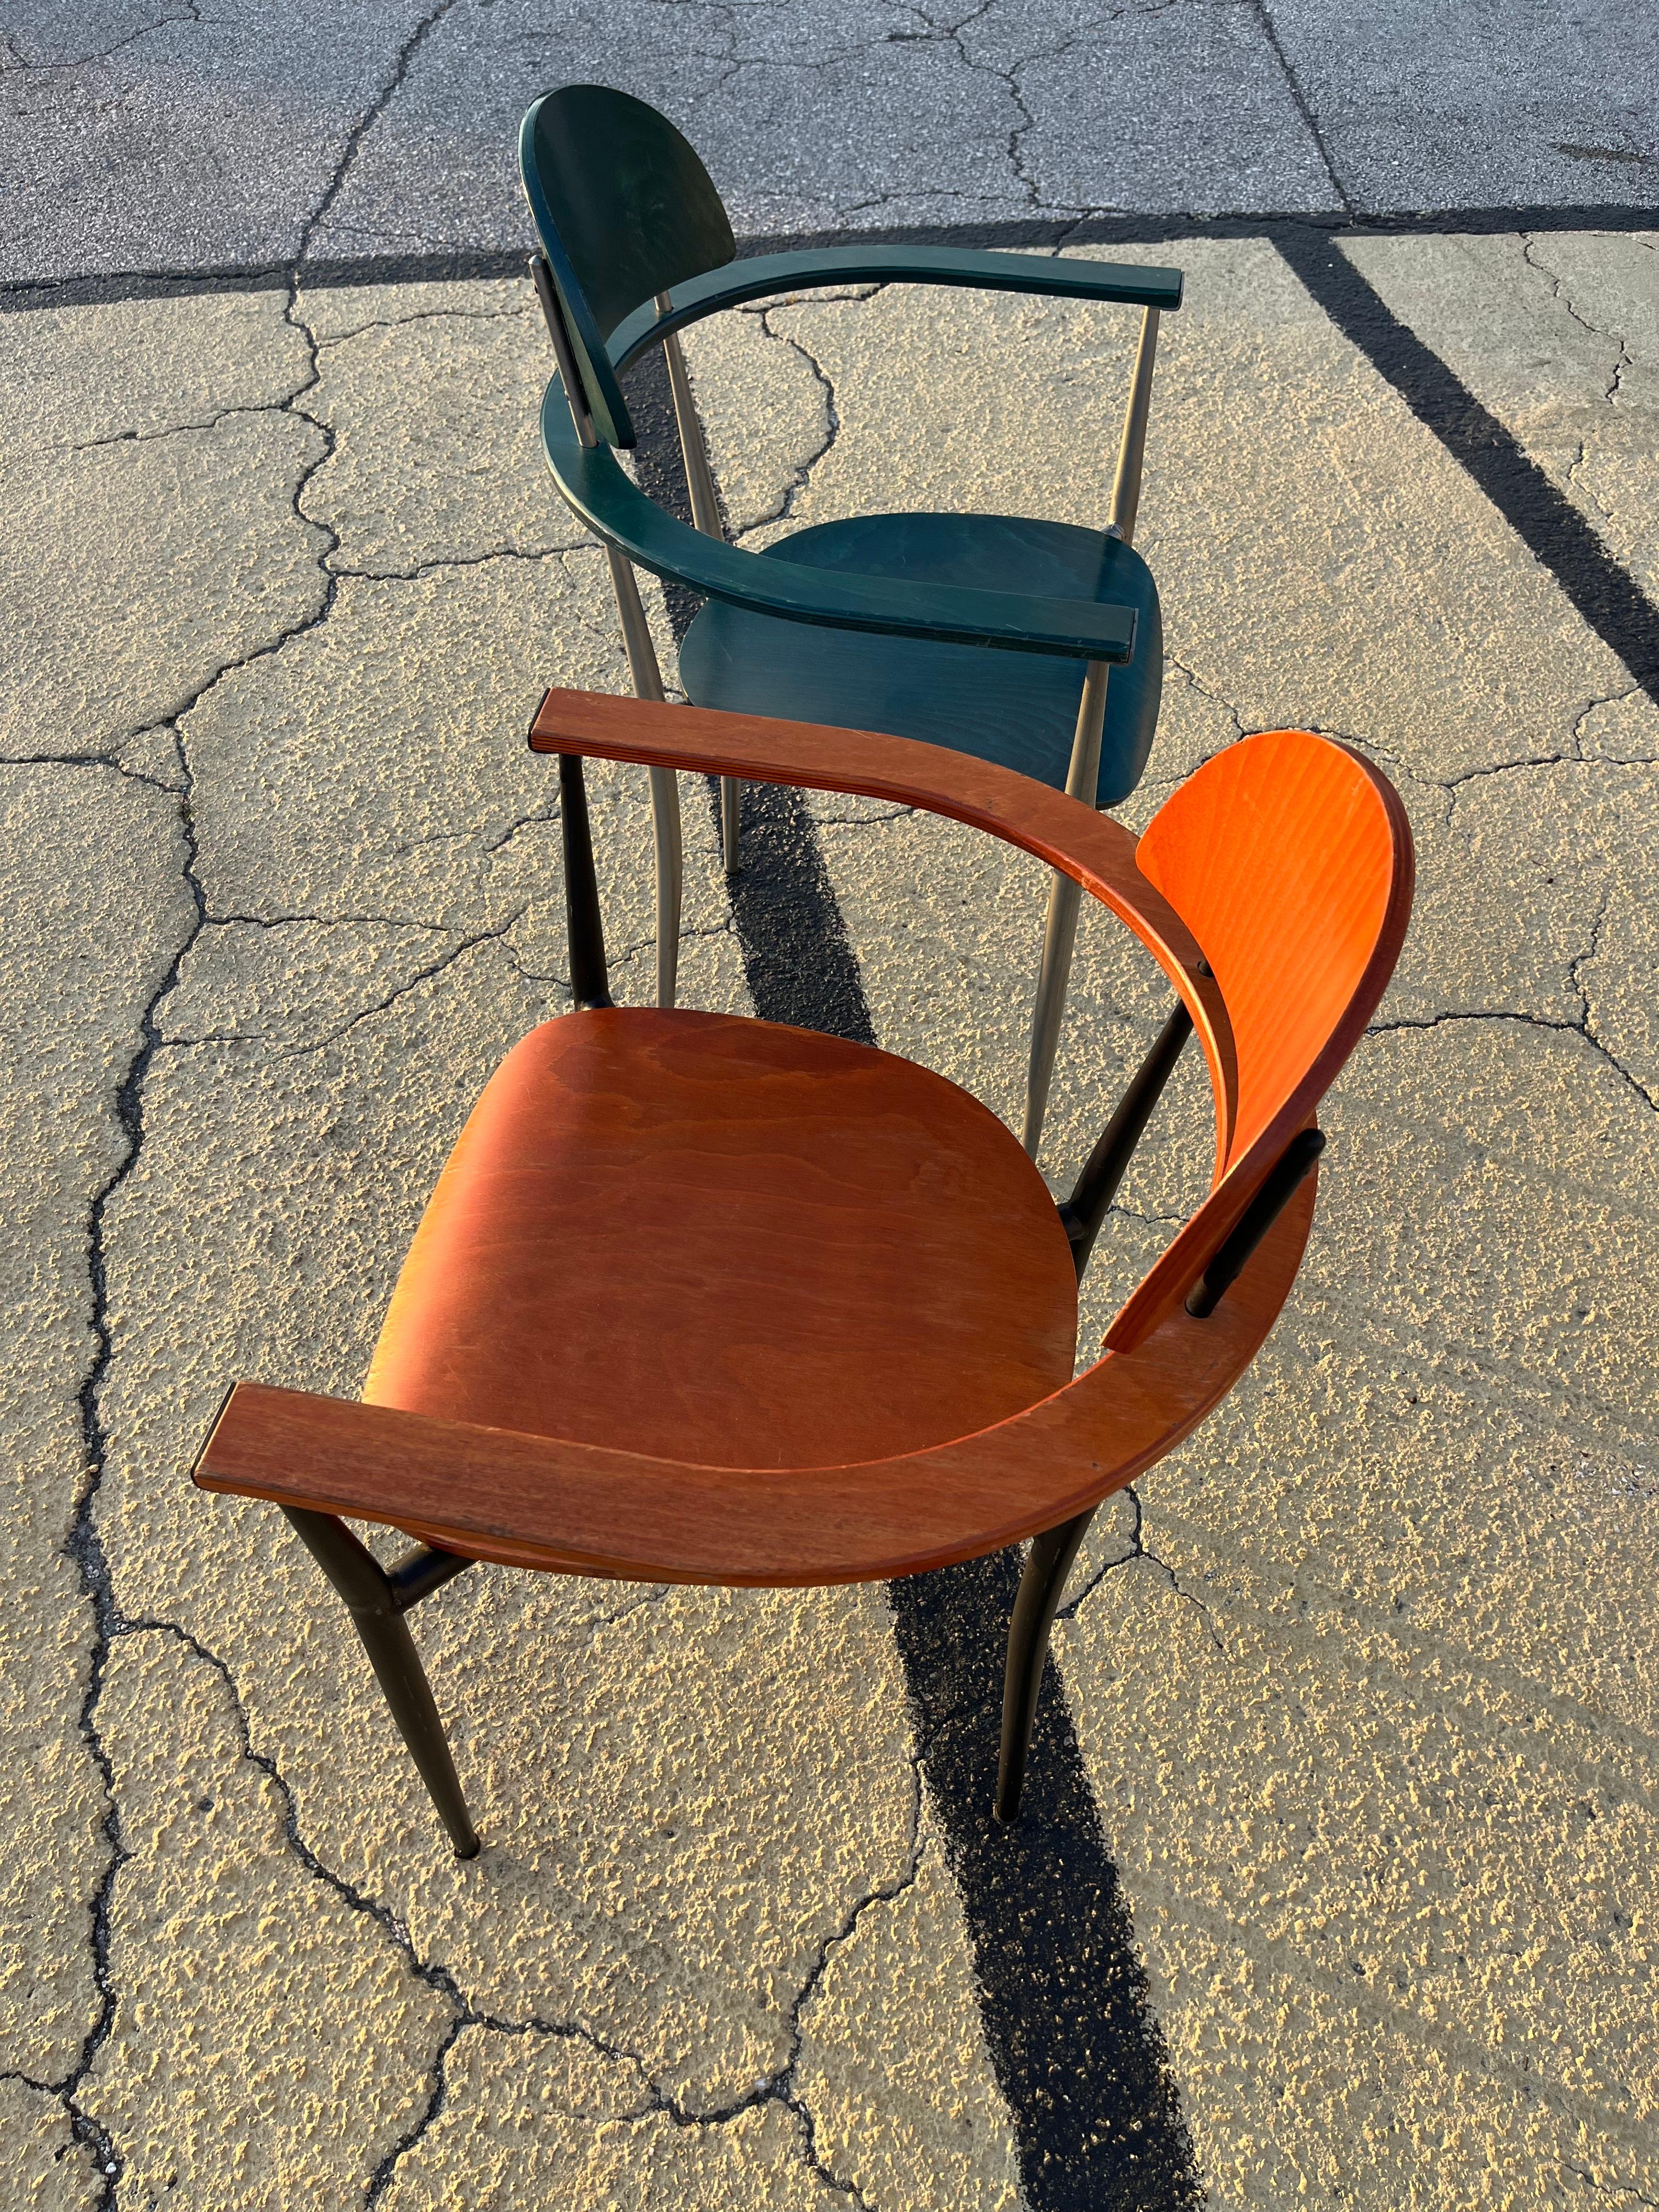 A Pair of Postmodern Accent Chairs in the Arrben Stiletto Chairs. Circa 1980s For Sale 6